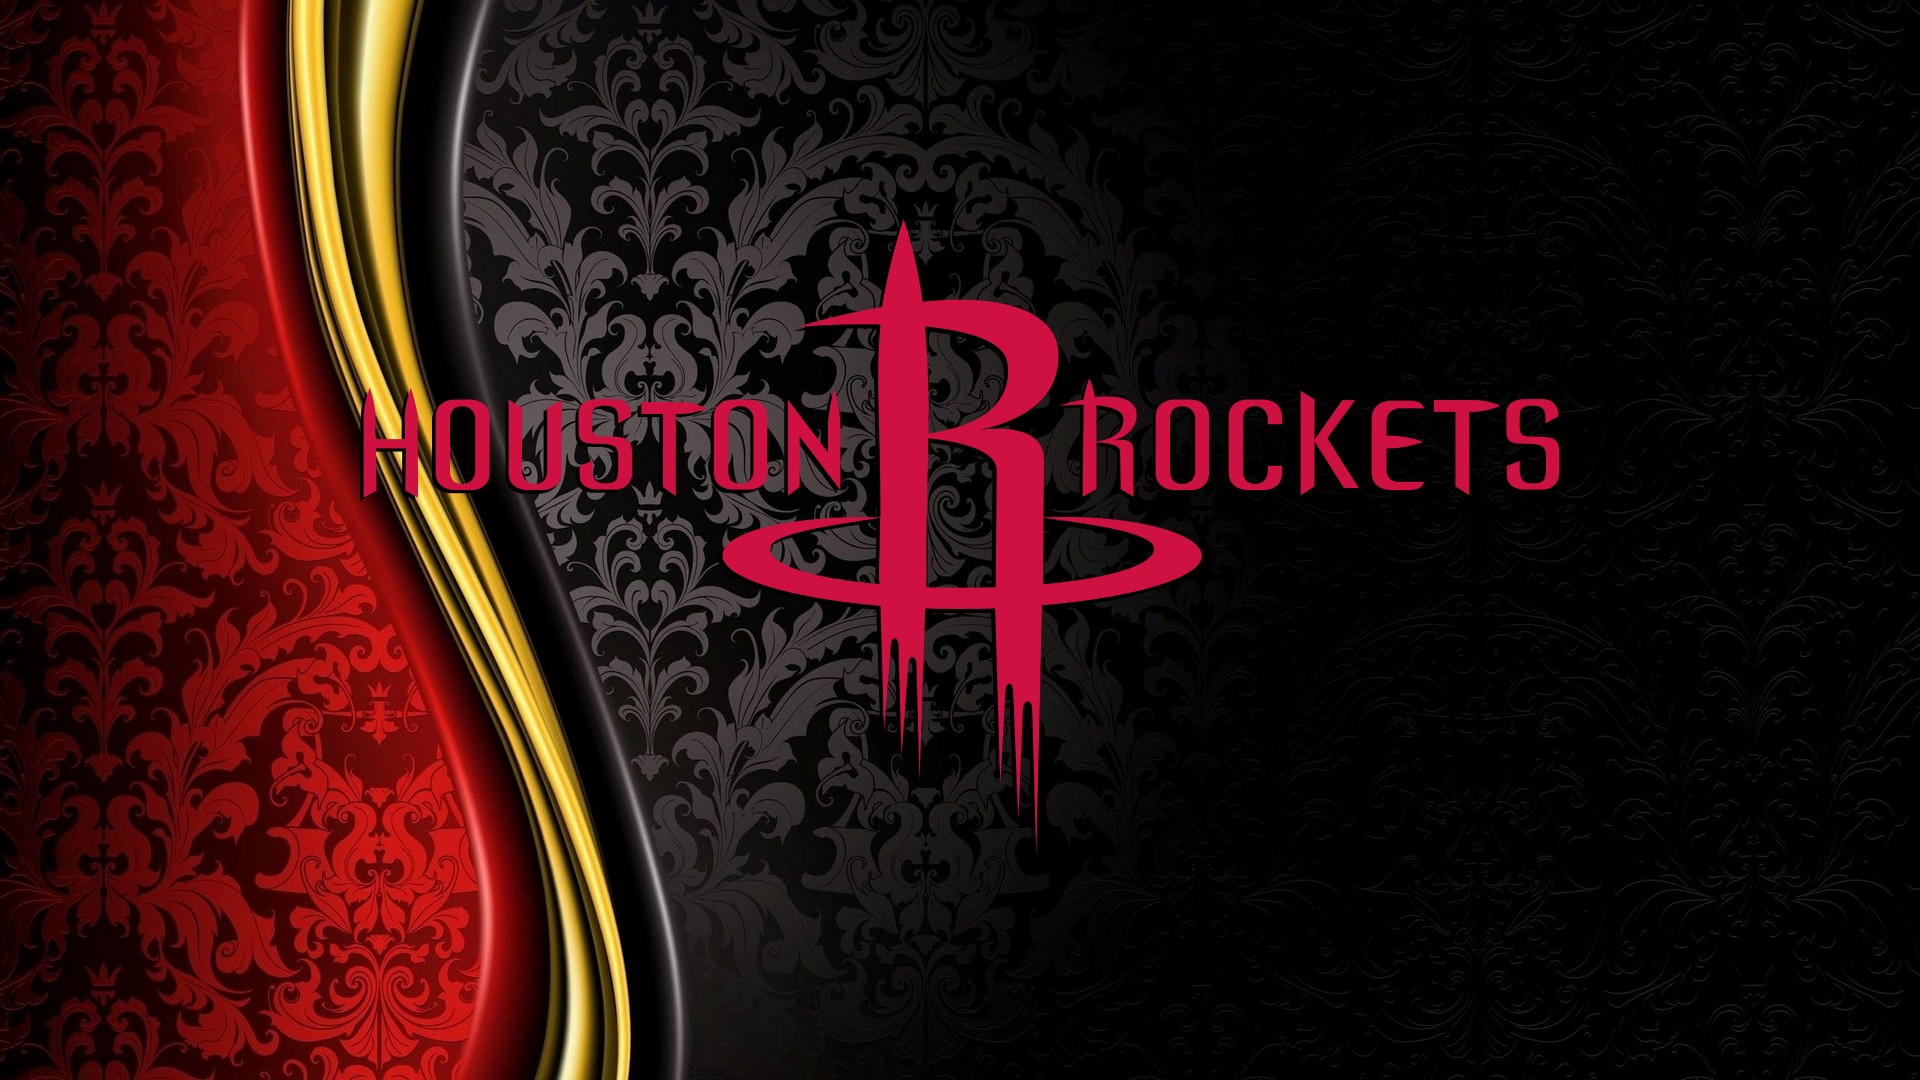 Windows Wallpaper Houston Rockets with image dimensions 1920x1080 pixel. You can make this wallpaper for your Desktop Computer Backgrounds, Windows or Mac Screensavers, iPhone Lock screen, Tablet or Android and another Mobile Phone device